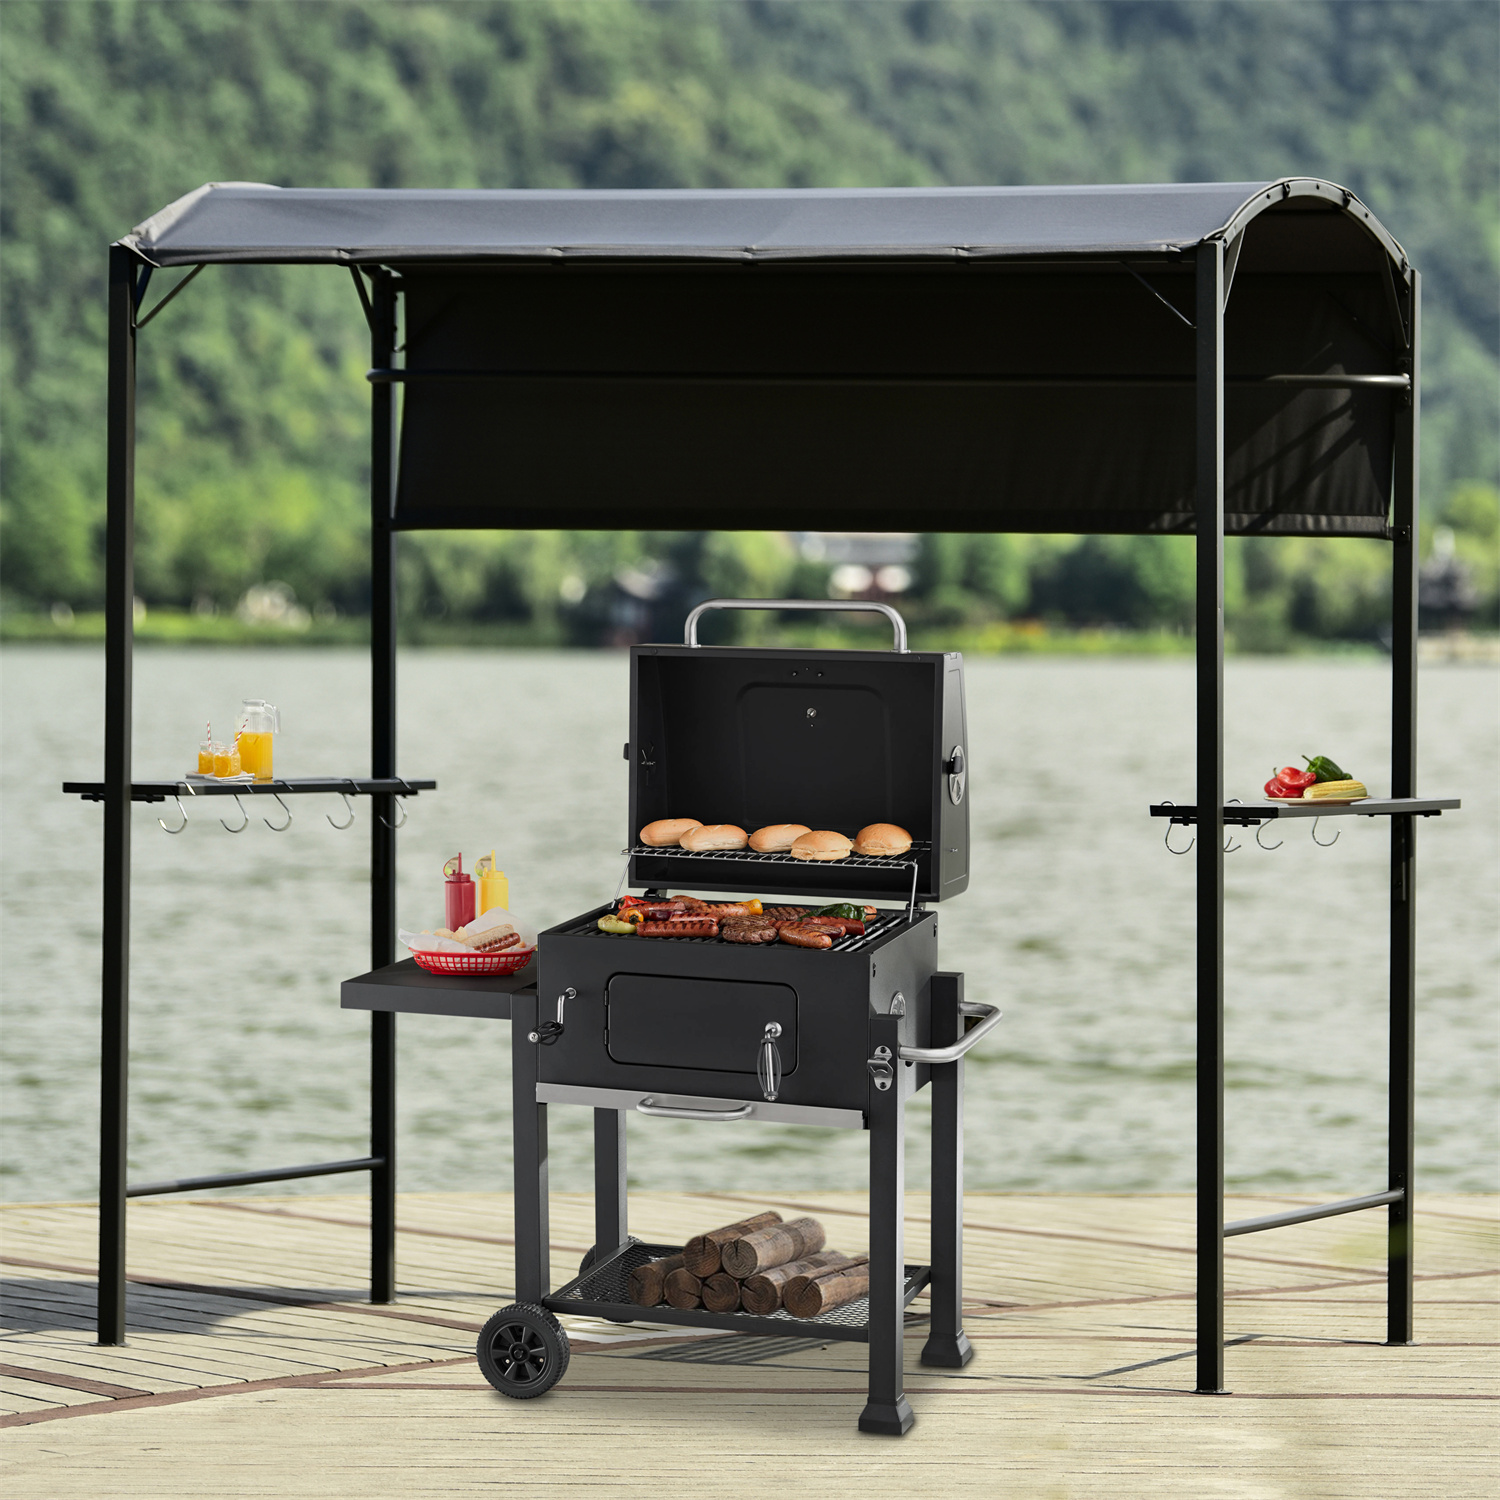 13.5x4.5 Ft Grill Gazebo Double Tier BBQ Gazebo with Dual Side Extendable Shades Outdoor Barbecue Grill Gazebo Shelter with 2 Side Shelves and Heavy-Duty Steel Frame for Patio, Garden, Beach, Gray - image 1 of 7